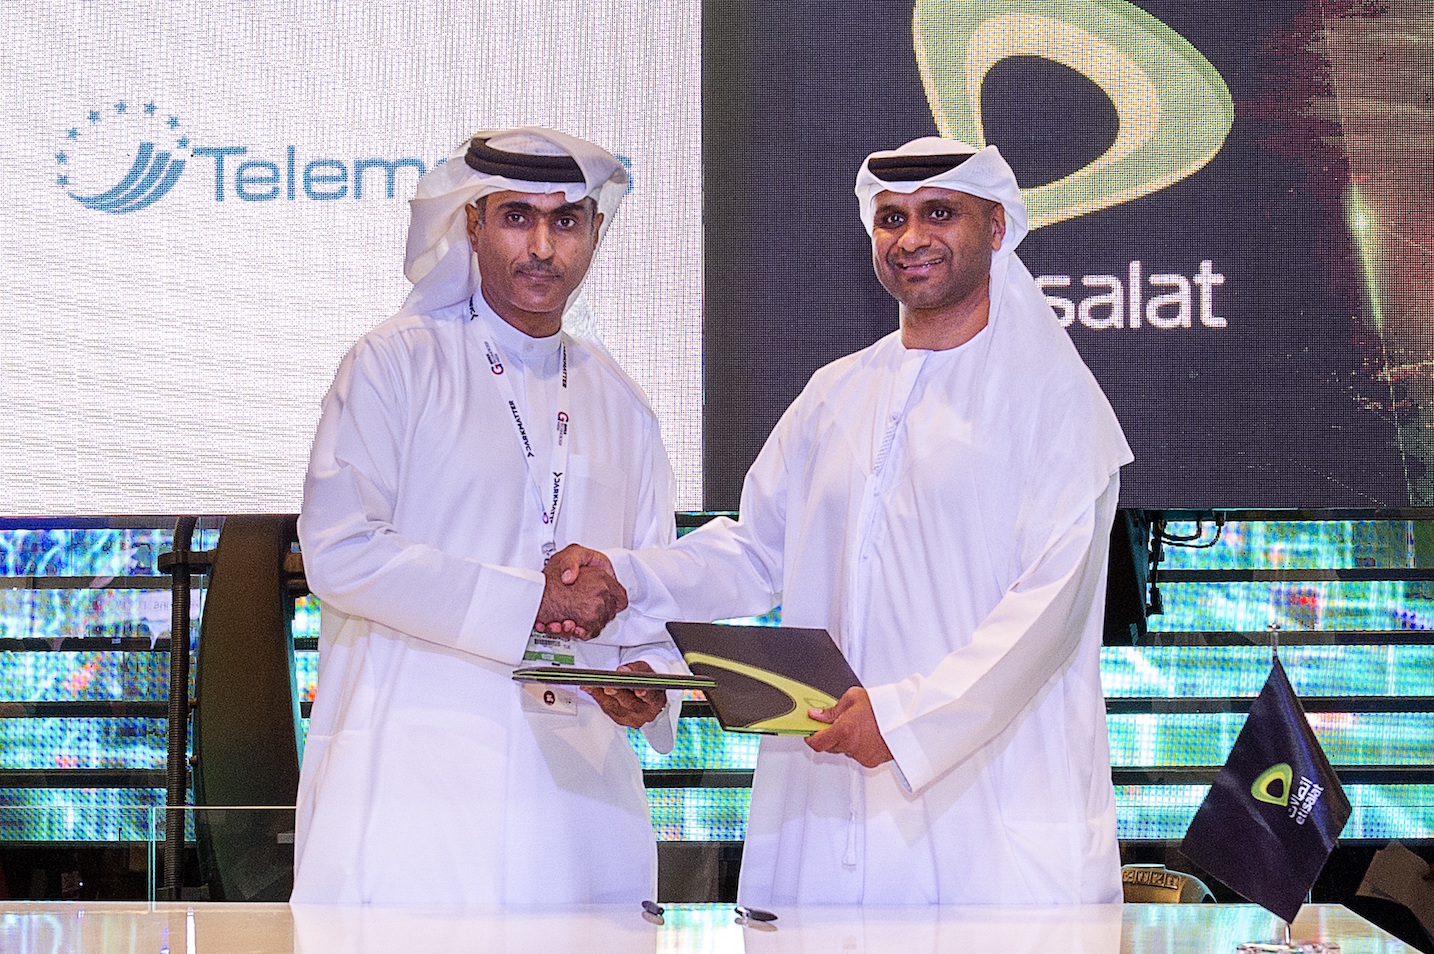 TransAd partners with Etisalat and Telematics for smart taxi initiative